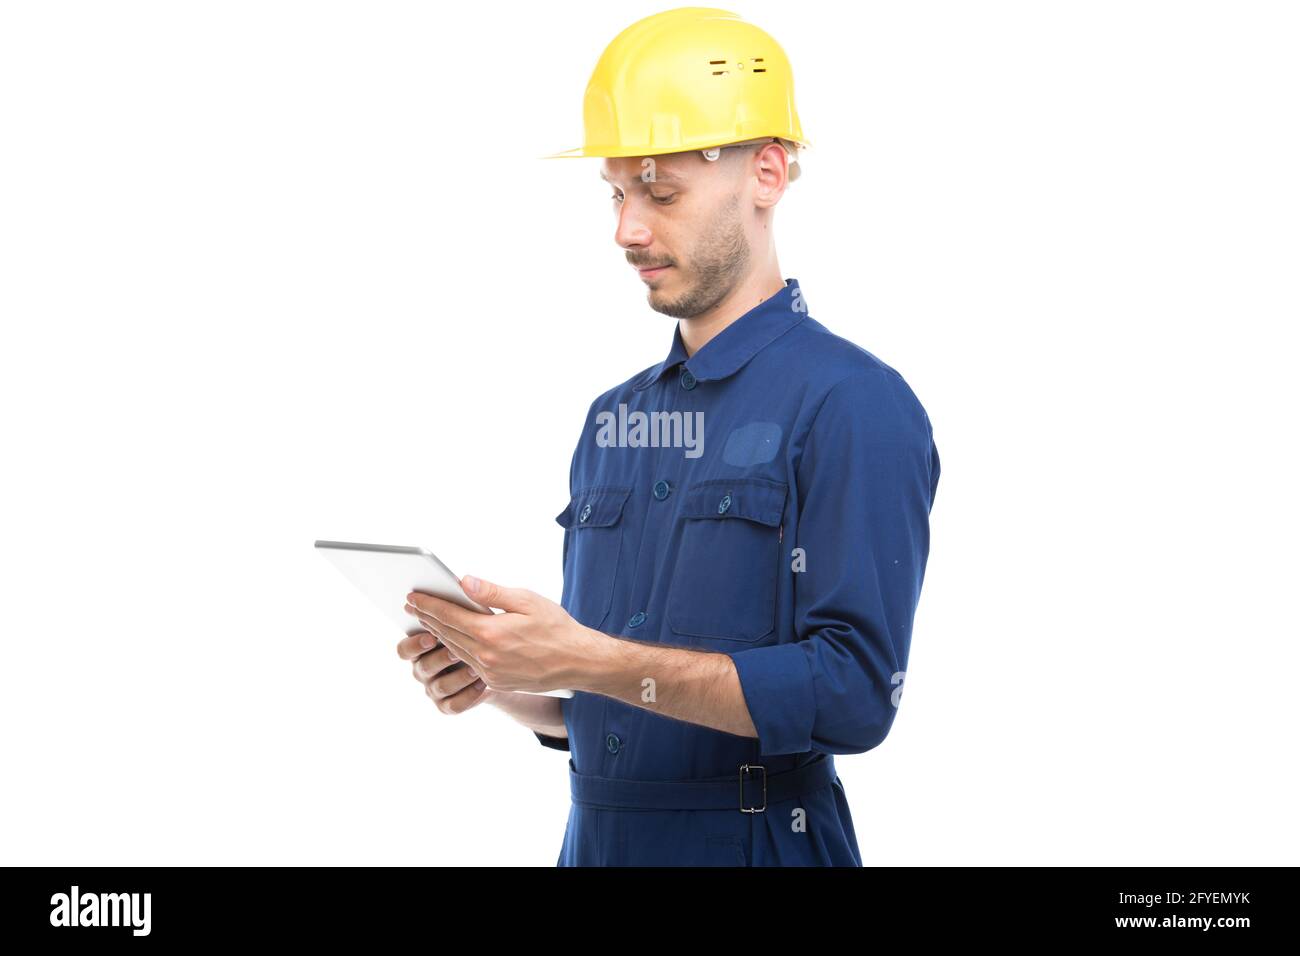 Horizontal medium portrait of successful handsome young adult Caucasian construction engineer wearing uniform using digital tablet, white background Stock Photo